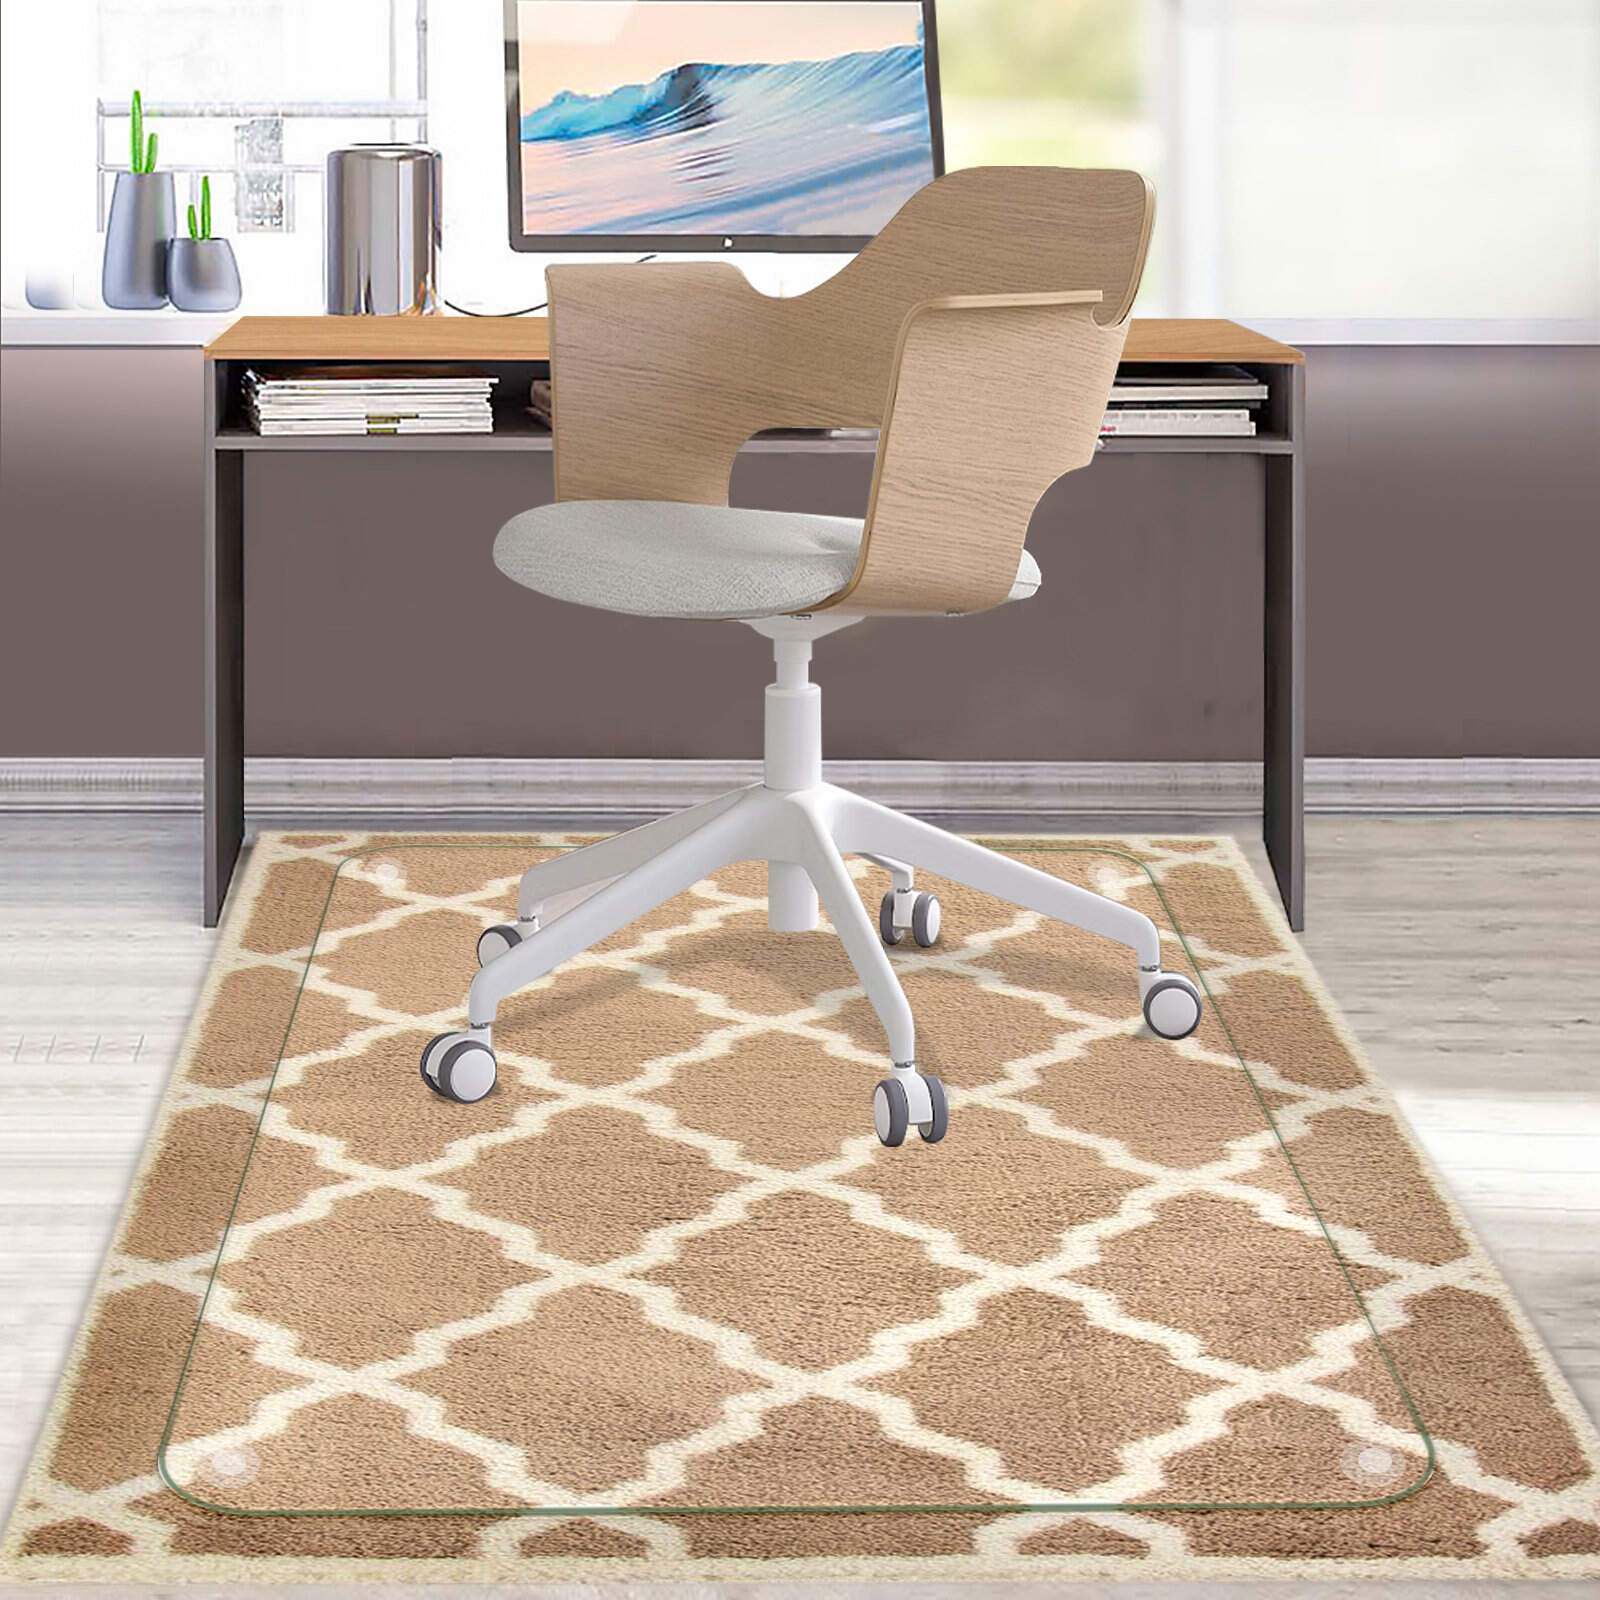 AiBOB Chair Mat for Low Pile Carpet, Flat Without Curling, 48 x 36 Inches Office Carpeted Floor Mats for Computer Desk, Clear